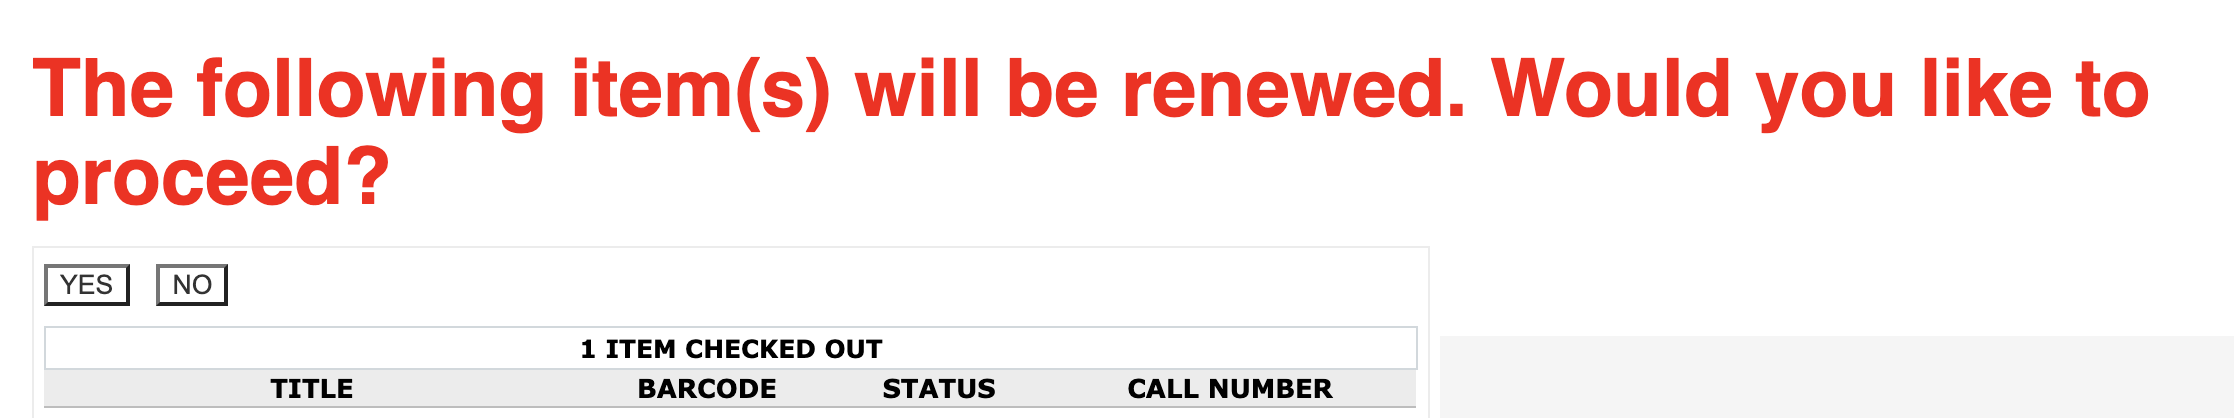 A screenshot of large red text reading "The following item(s) will be renewed. Would you like to proceed?" then buttons "YES NO" etc